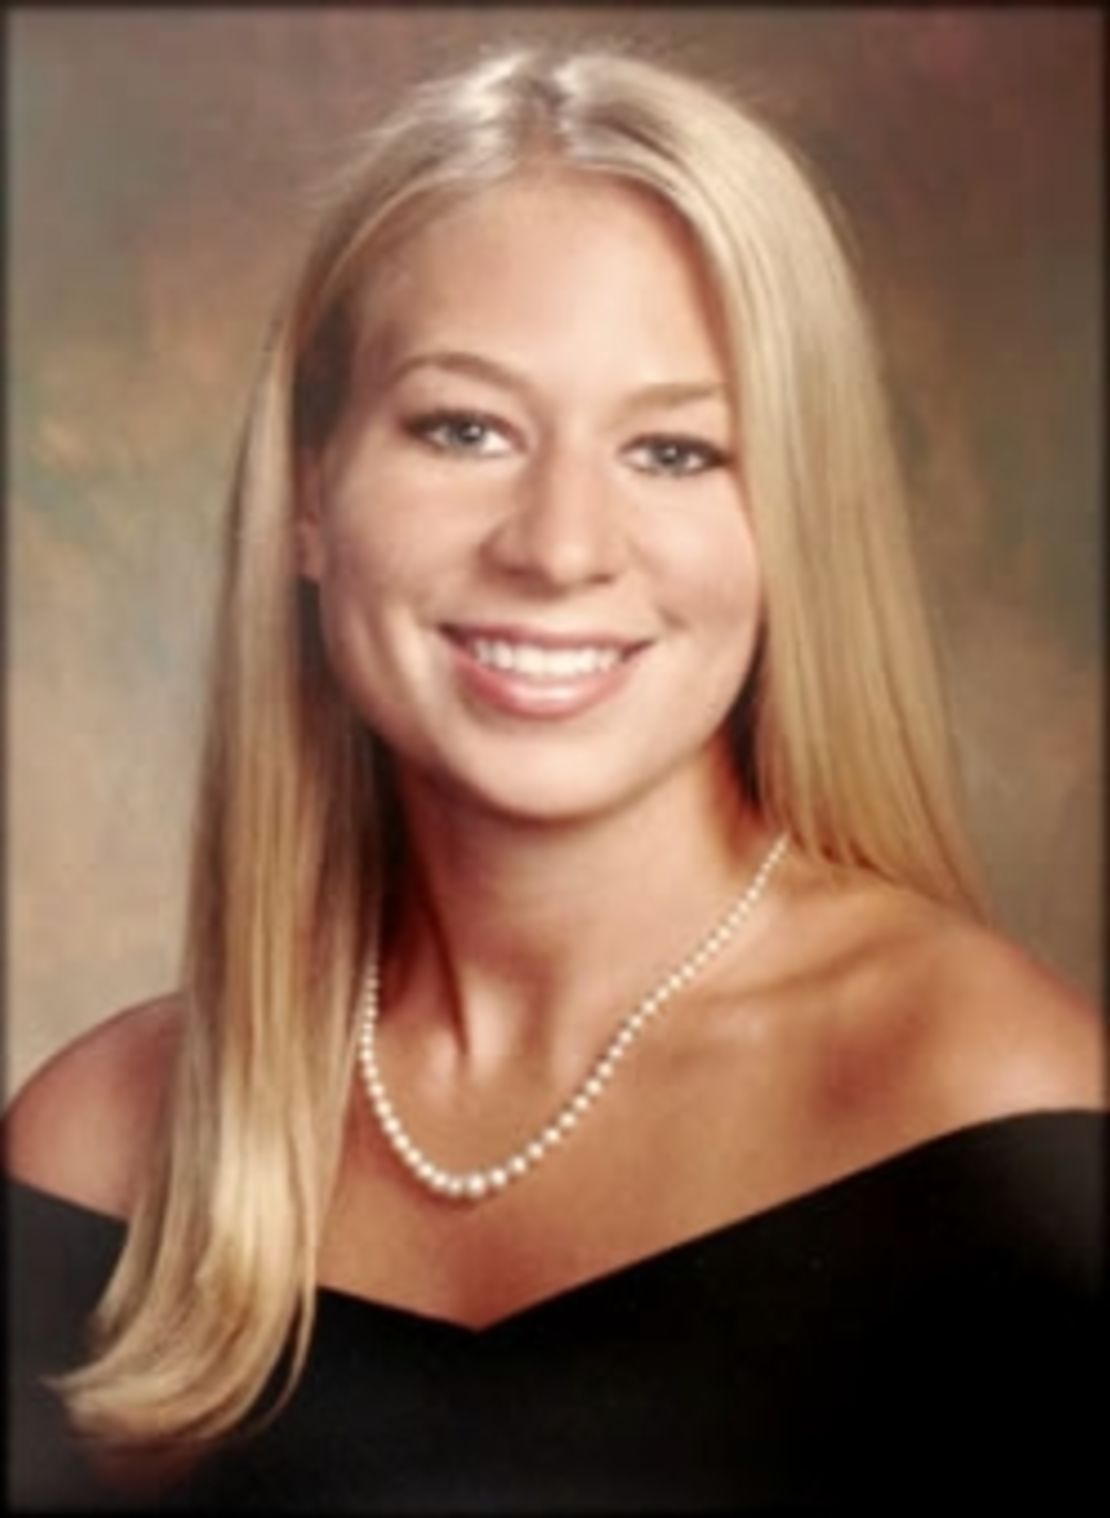 Van der Sloot was the main suspect in the 2005 disappearance of American teenager Natalee Holloway in Aruba.